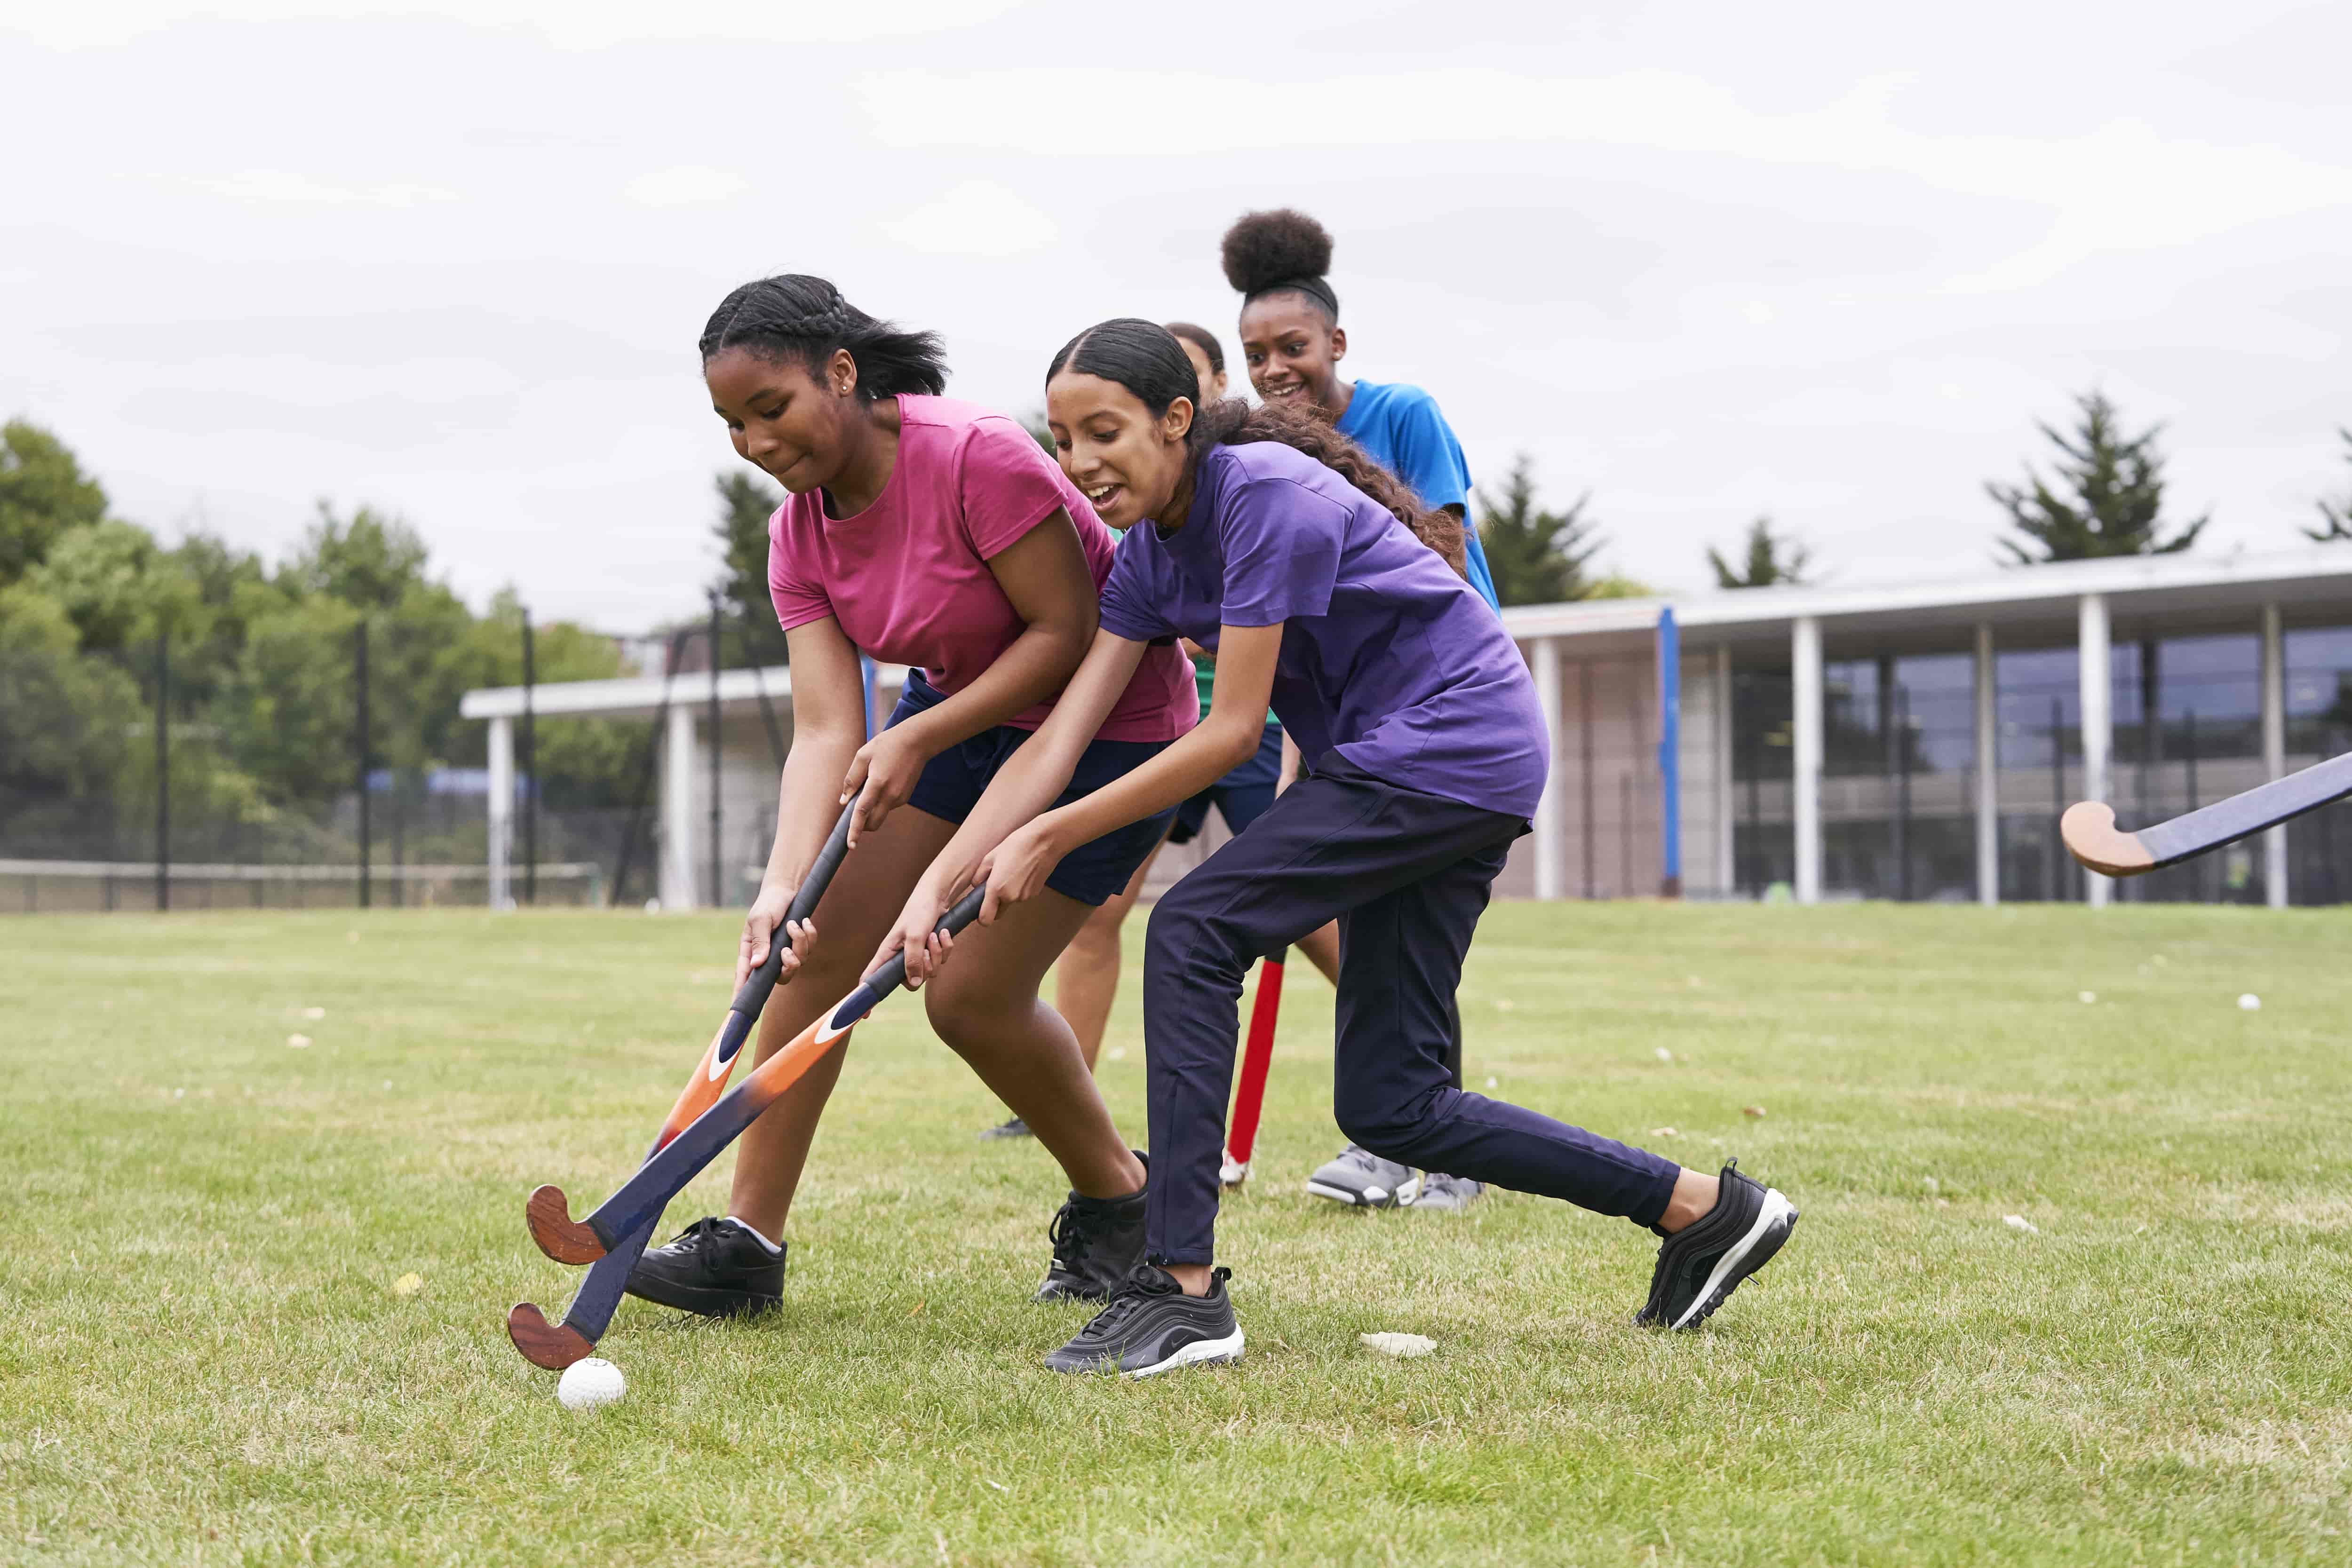 Four teenage girls playing hockey on outdoor school pitch 